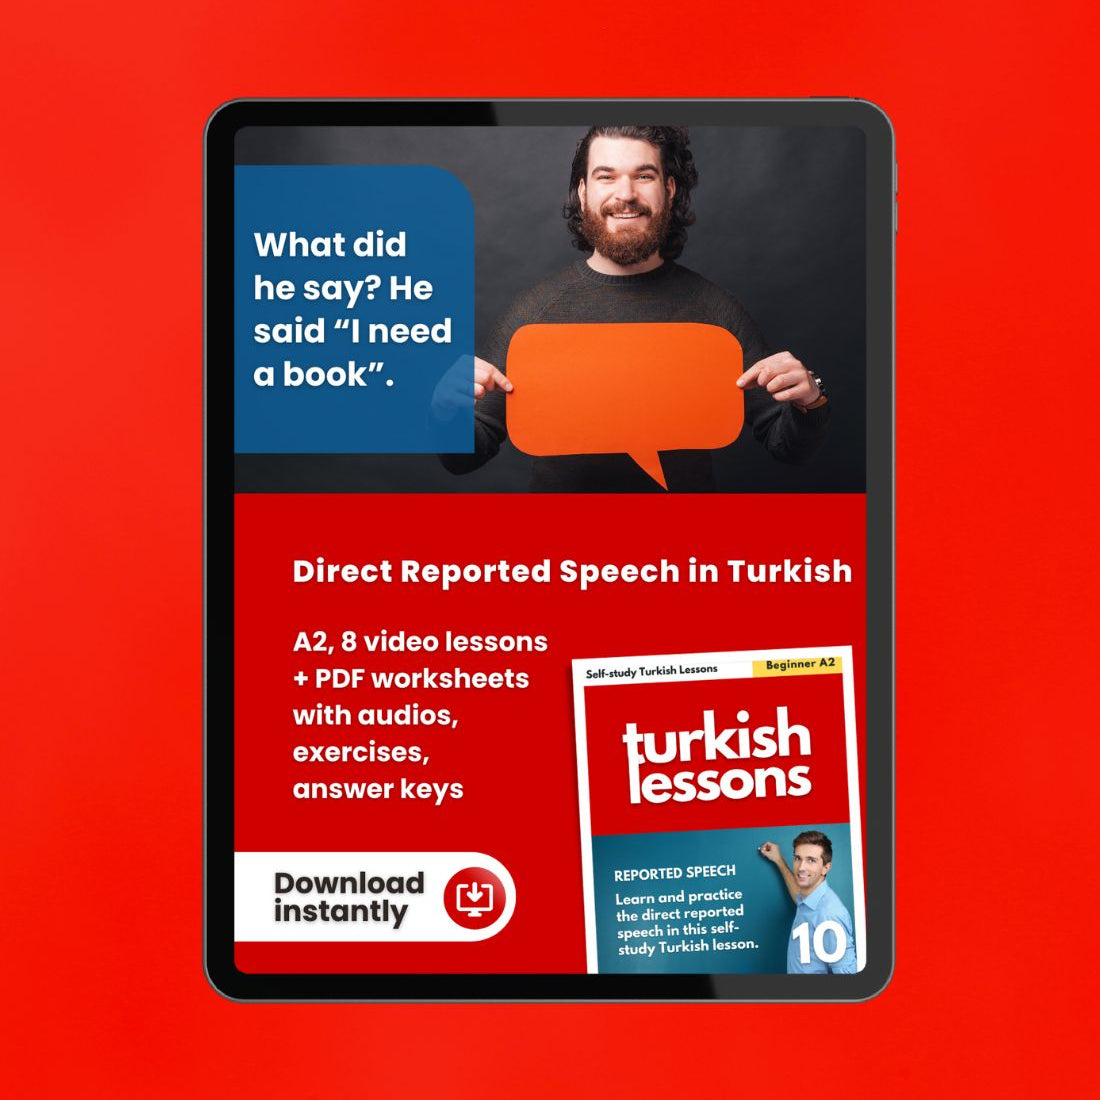 turkish lessons a2 - direct reported speech in turkish language